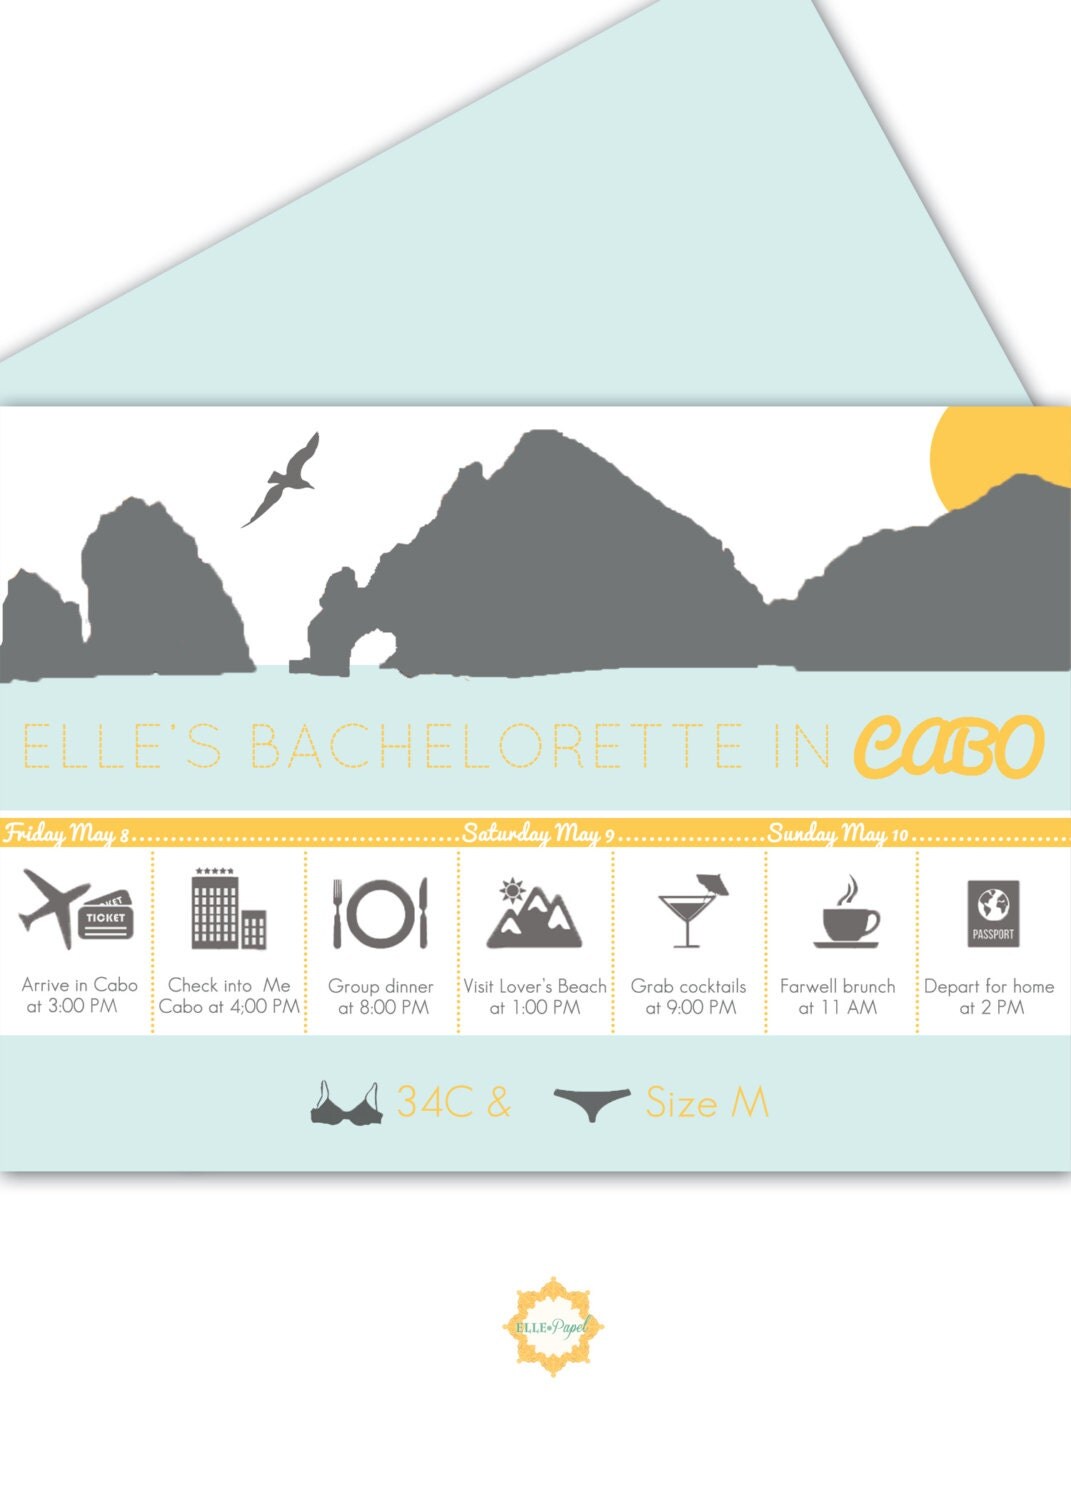 Printable Itinerary for a Bachelorette Weekend Getaway- Bachelorette Party in Cabo San Lucas